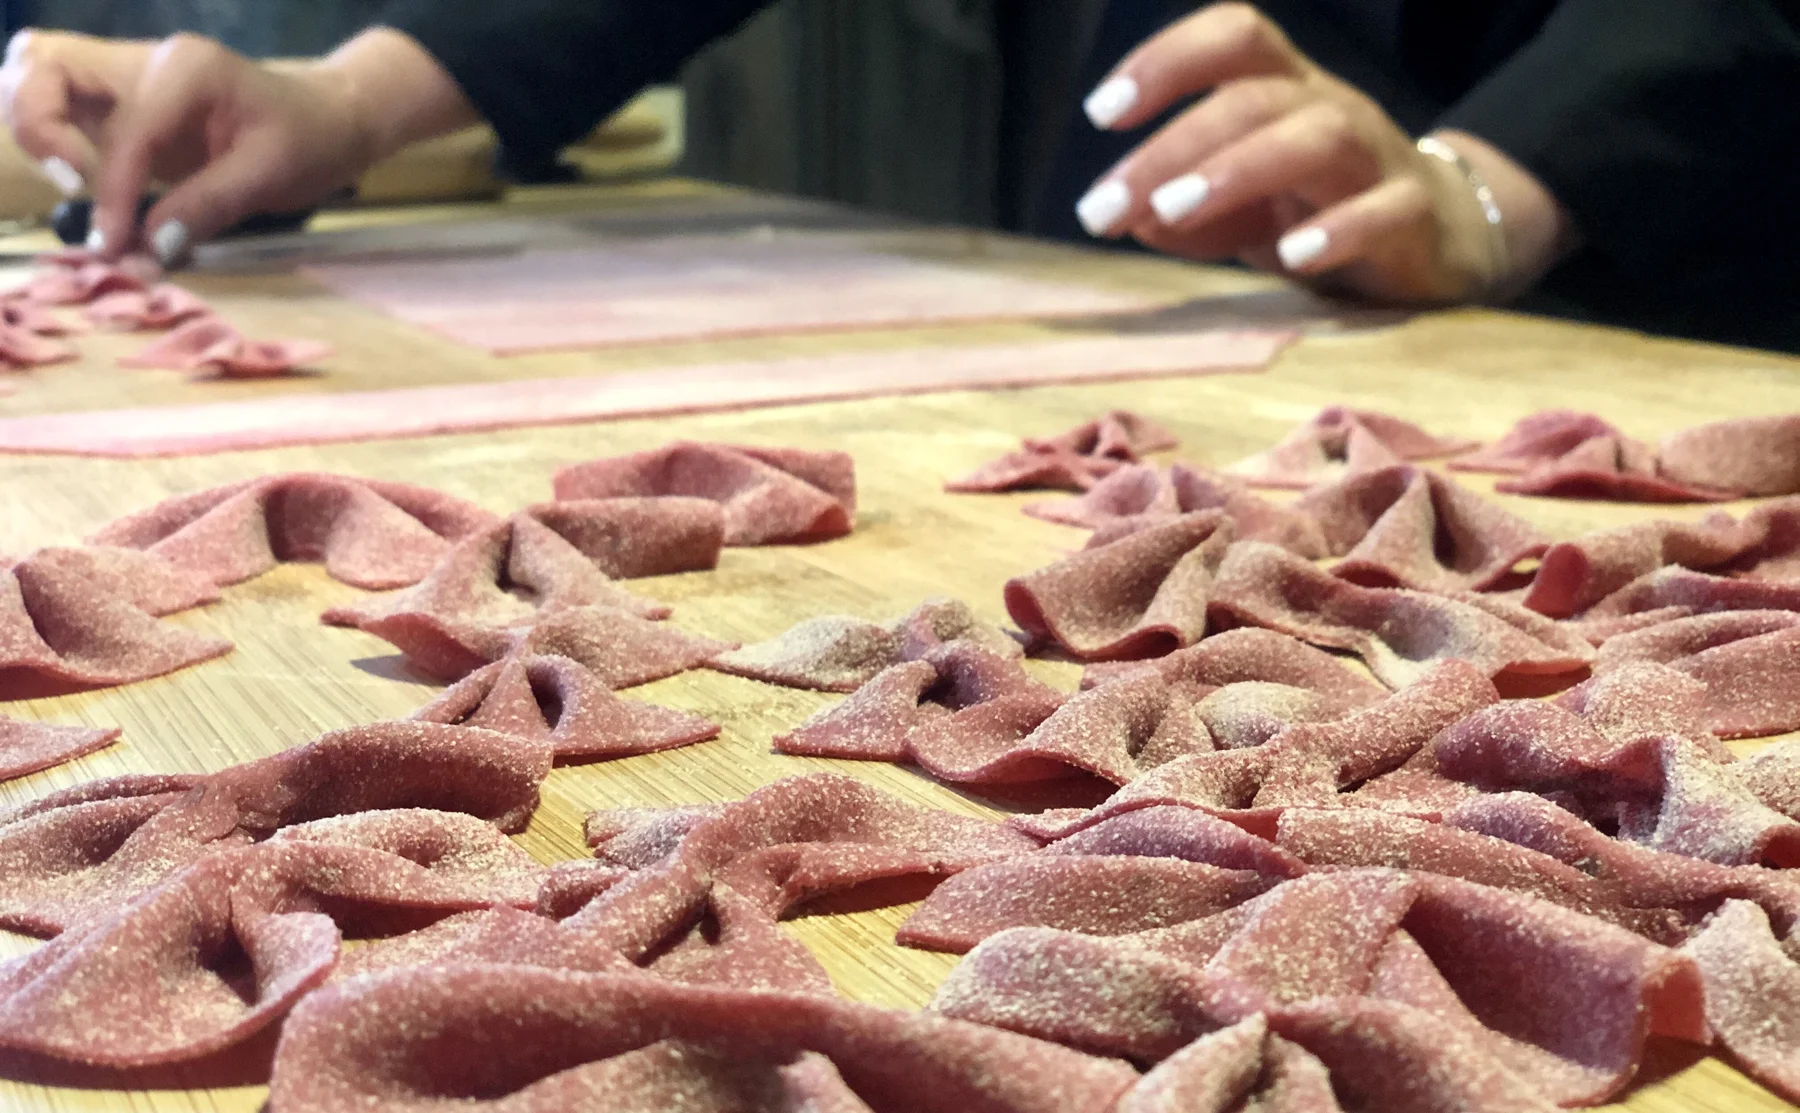 Learn how to make Four-cheese "Farfalle" Pasta by hand - 1392837